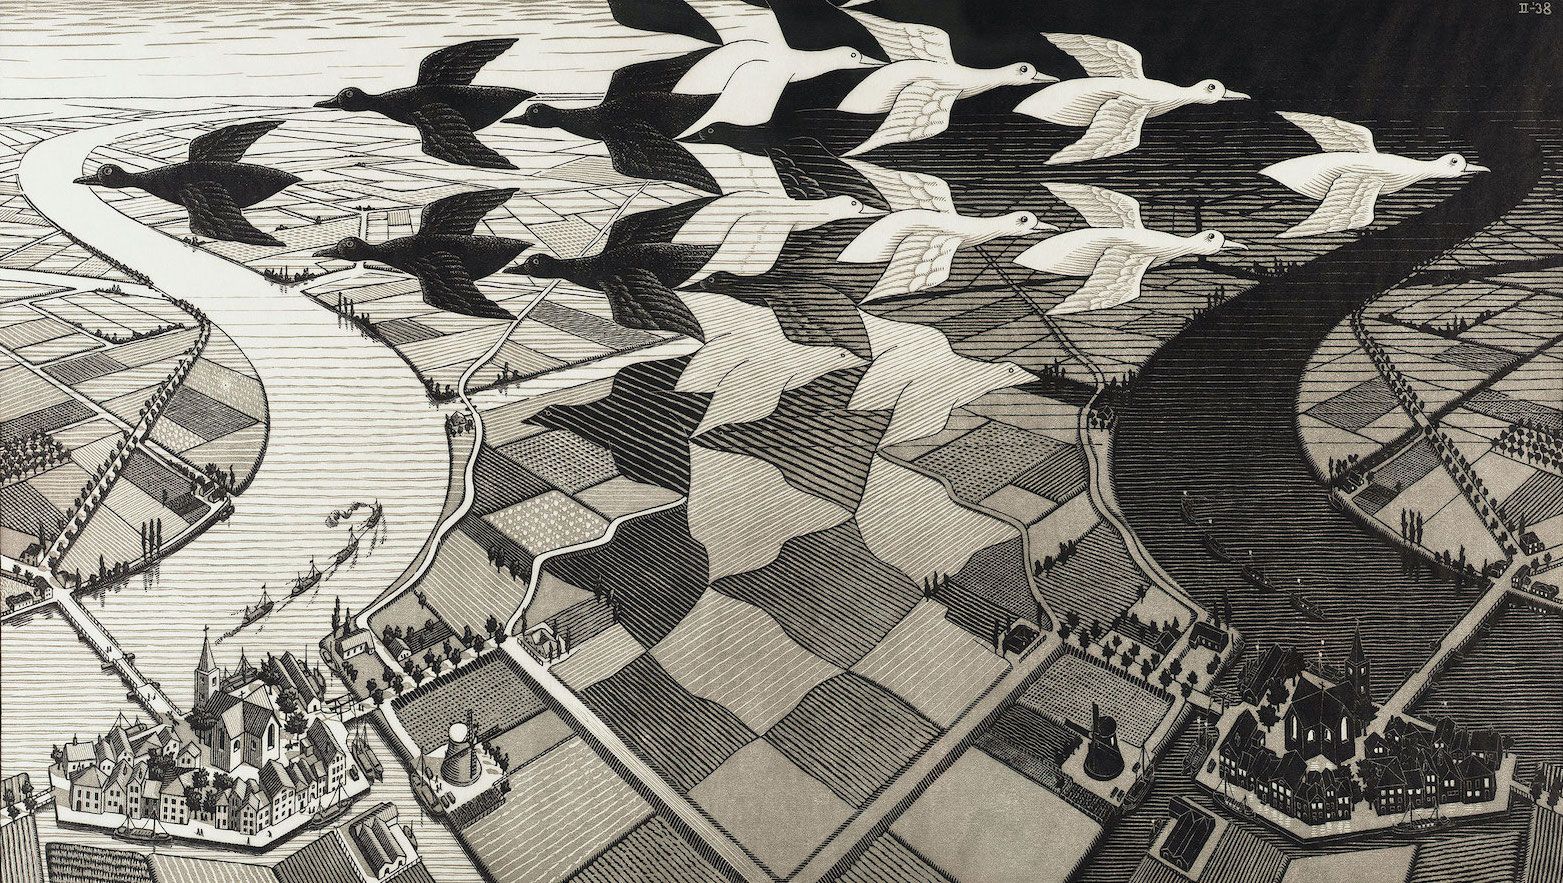 Day and Night, 1938, by M.C. Escher